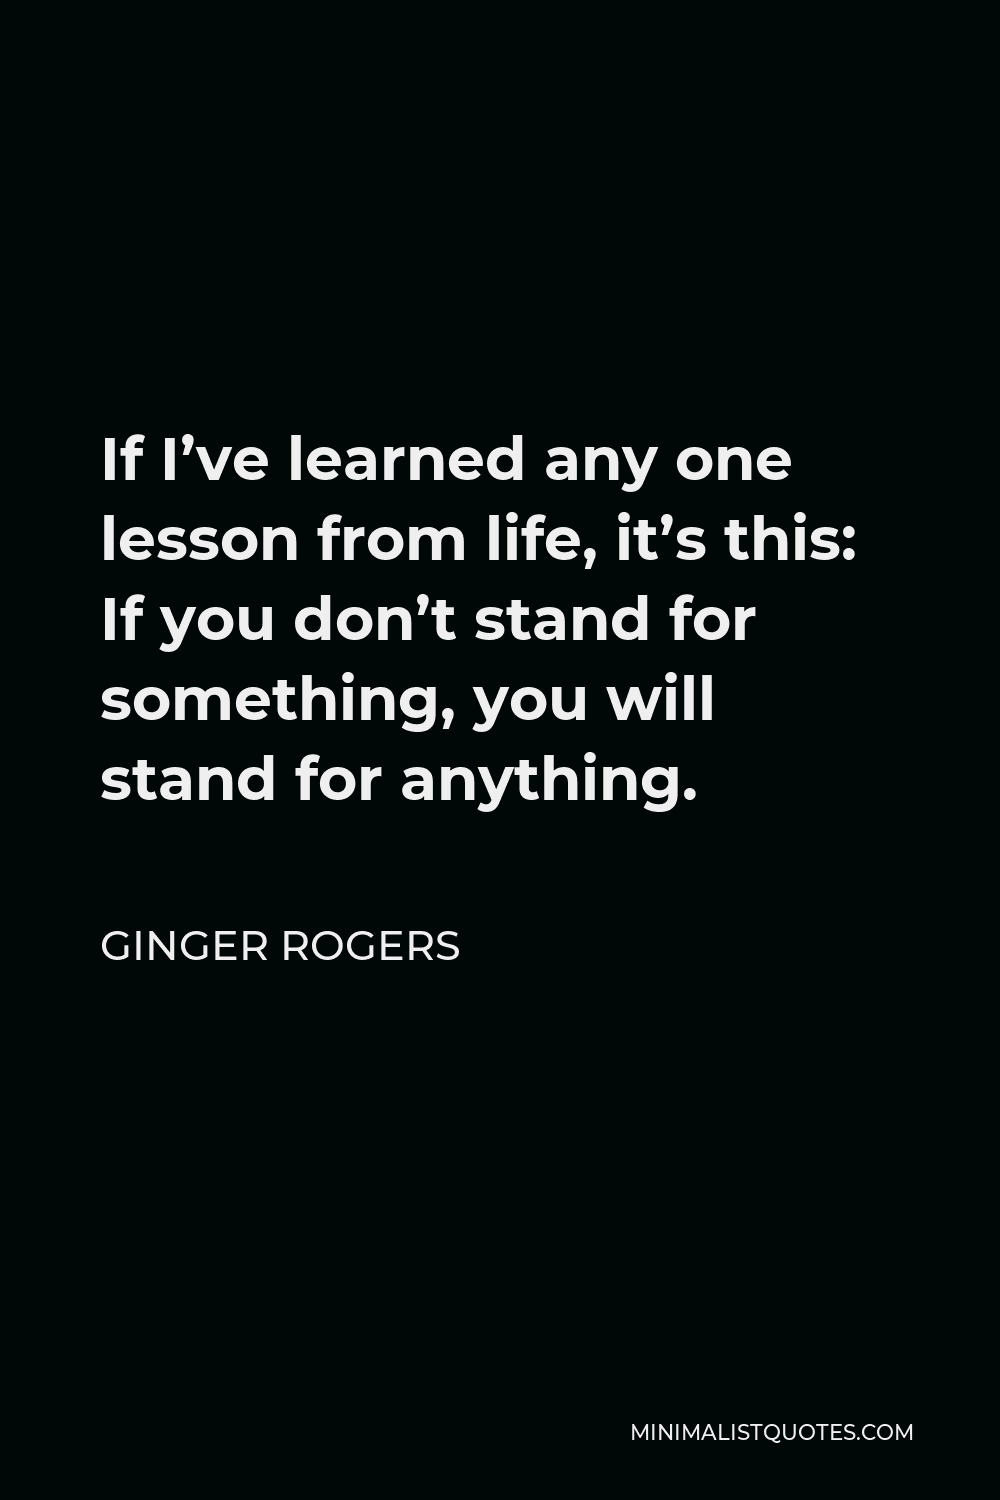 Ginger Rogers Quote - If I’ve learned any one lesson from life, it’s this: If you don’t stand for something, you will stand for anything.